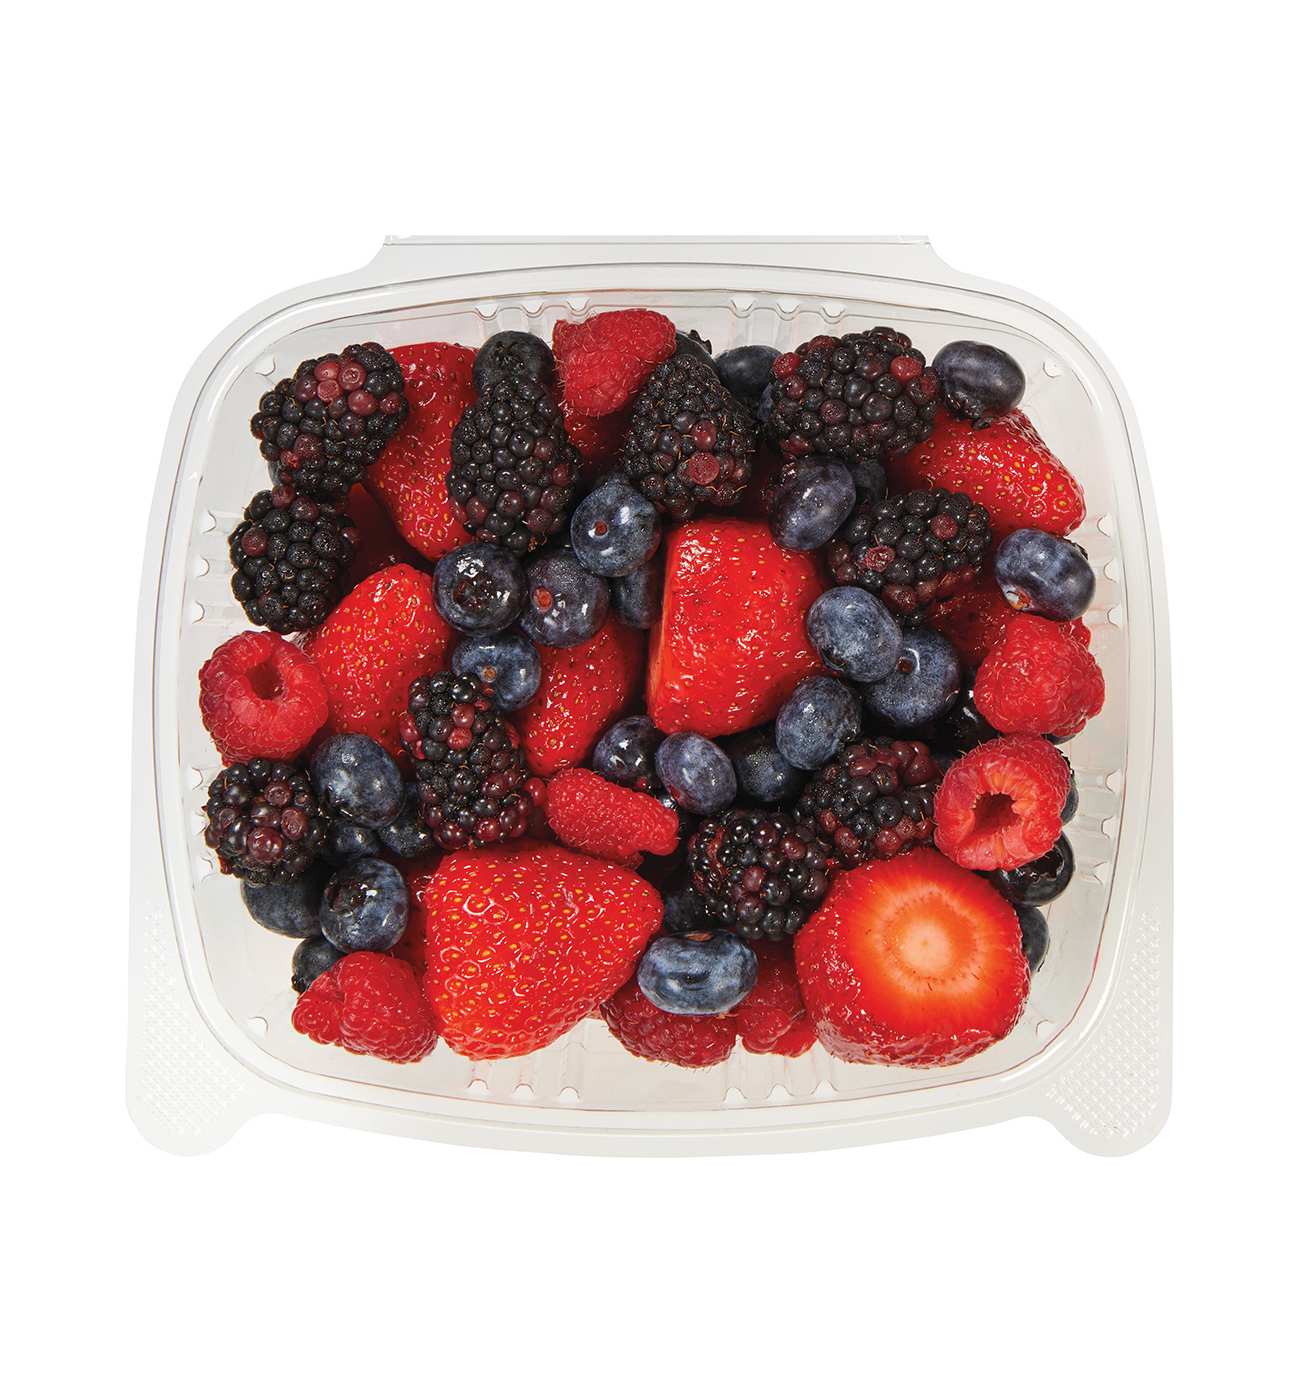 H-E-B Fresh Mixed Berries - Large; image 1 of 2